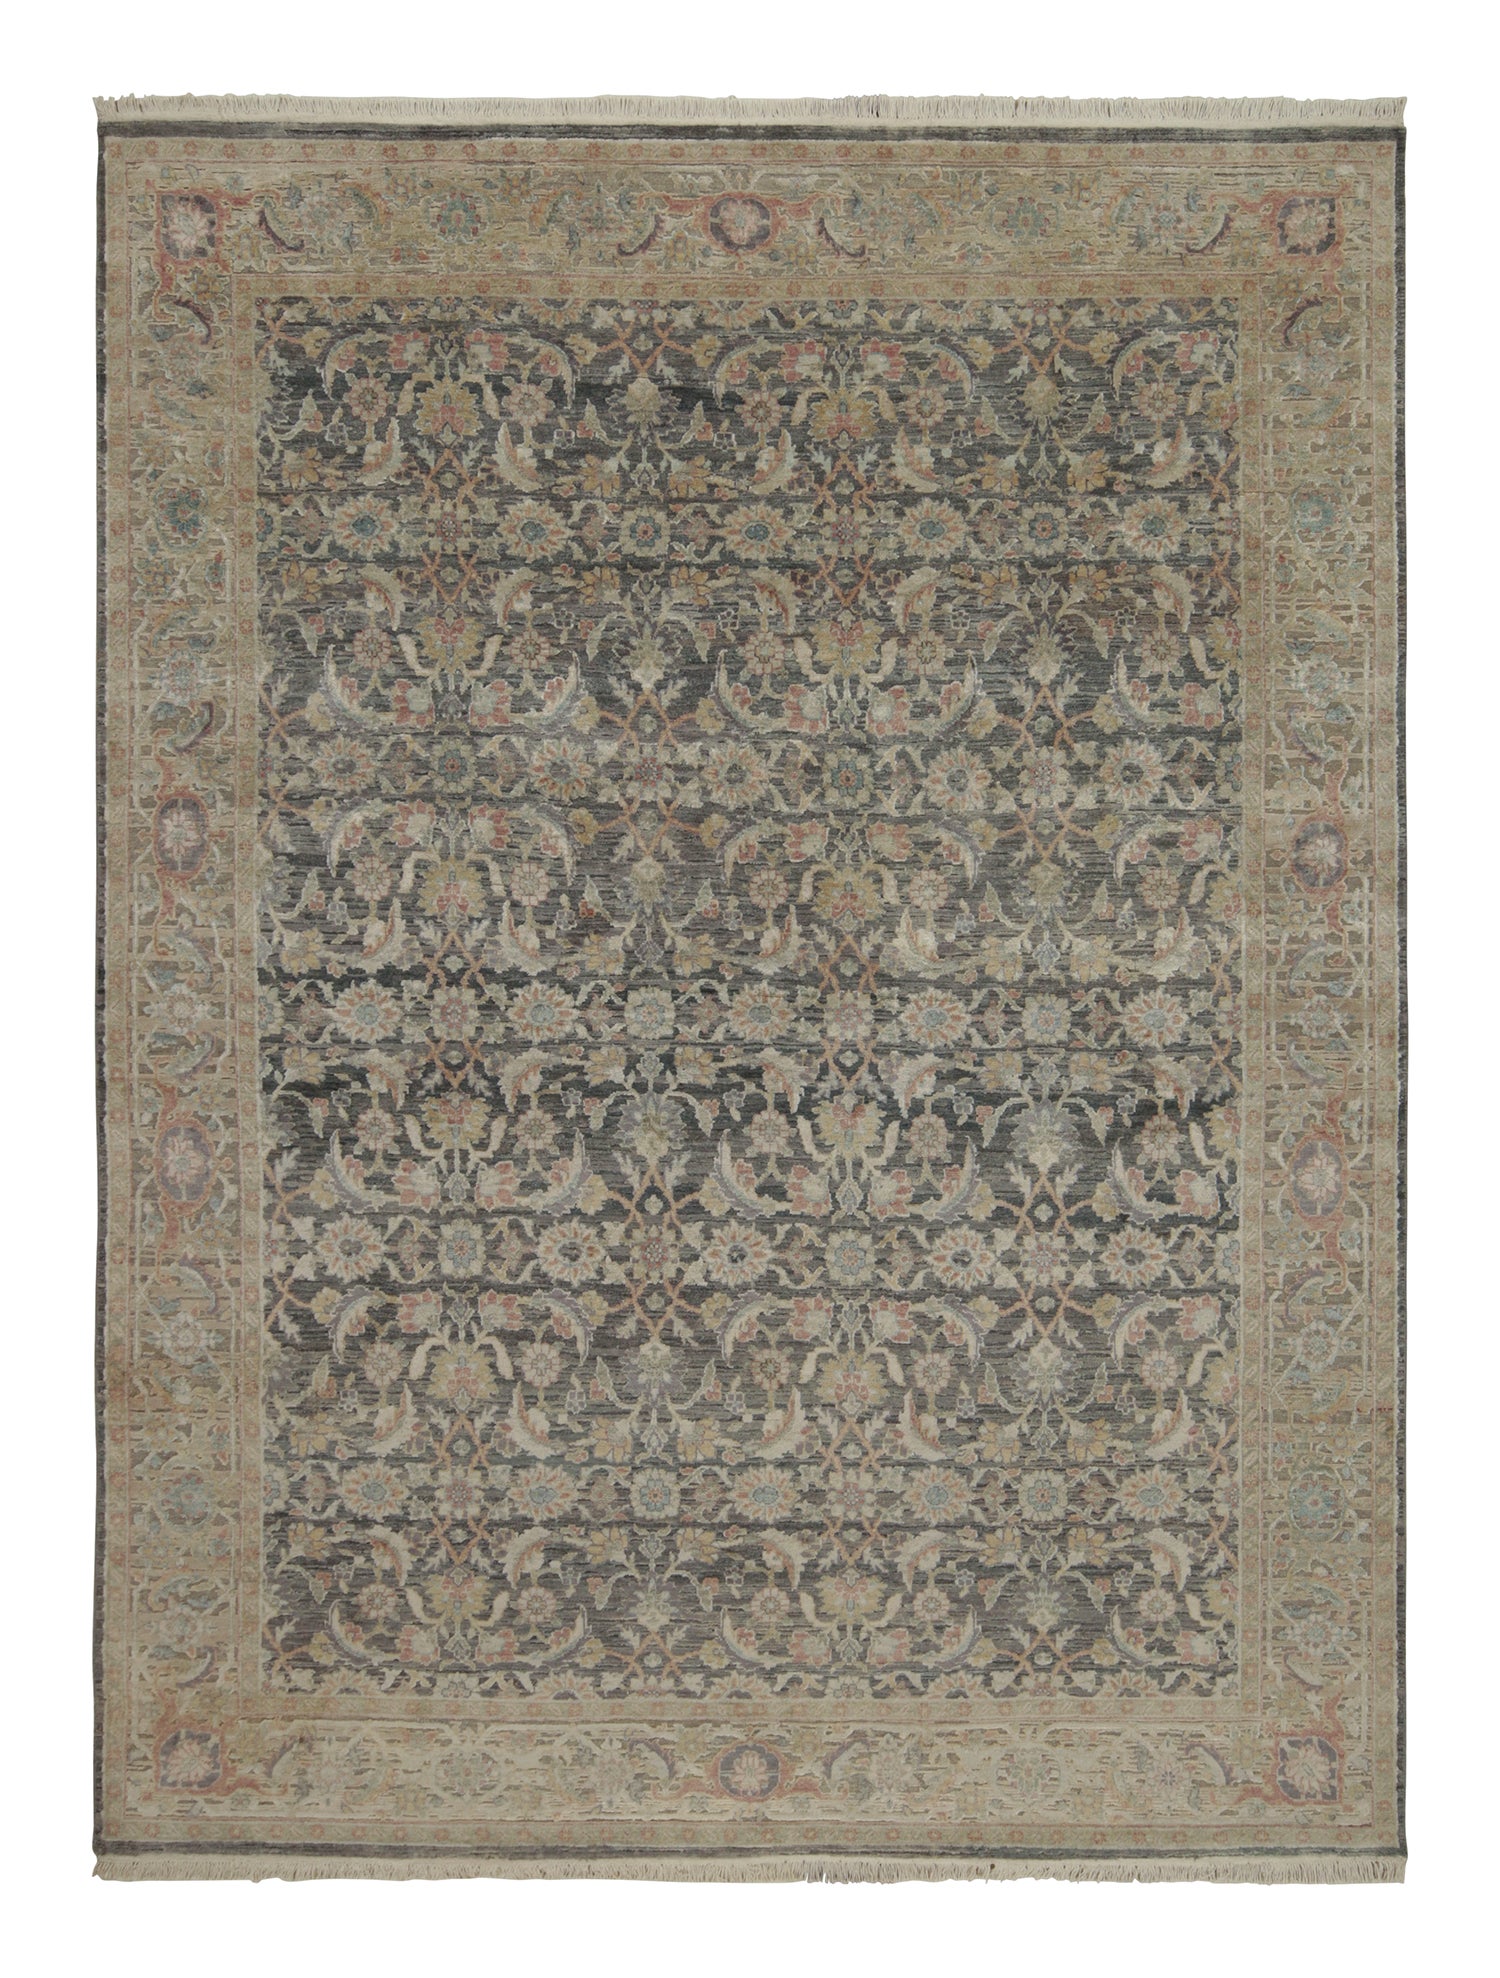 Rug & Kilim’s Herati Style Rug with Gray, Blue and Beige-Brown Floral Patterns For Sale